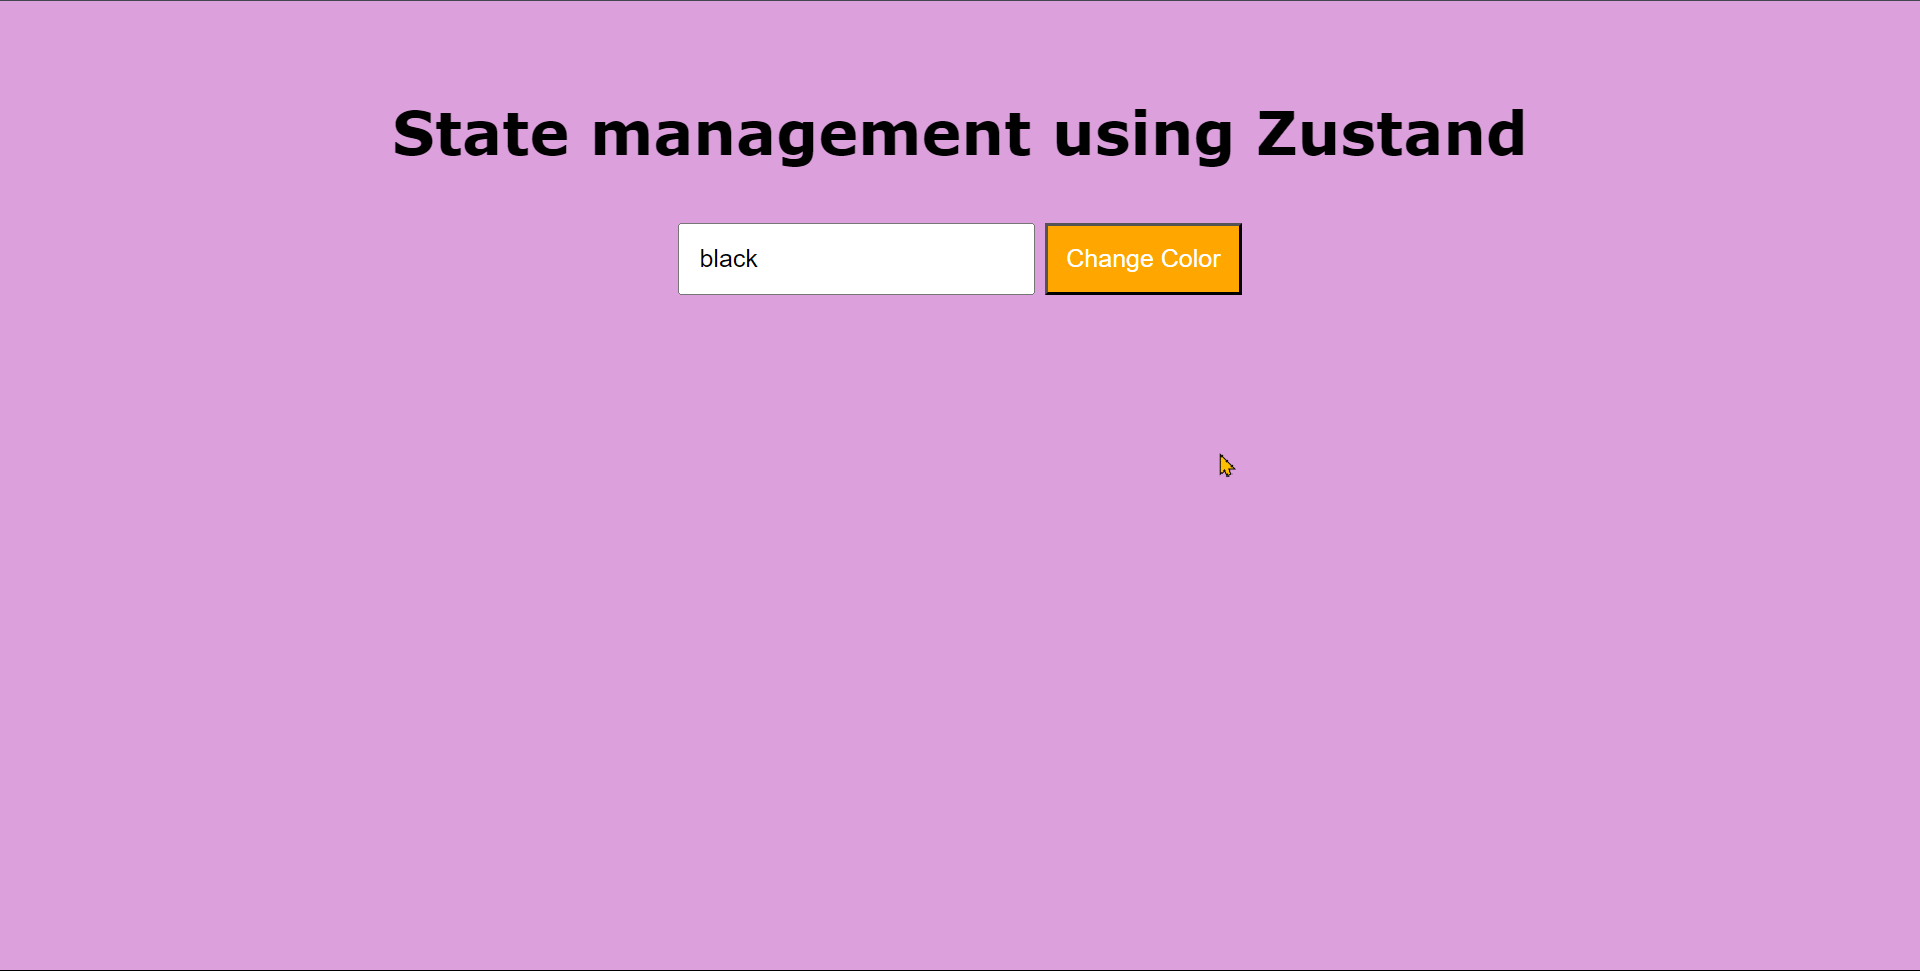 Applying zustand to the application